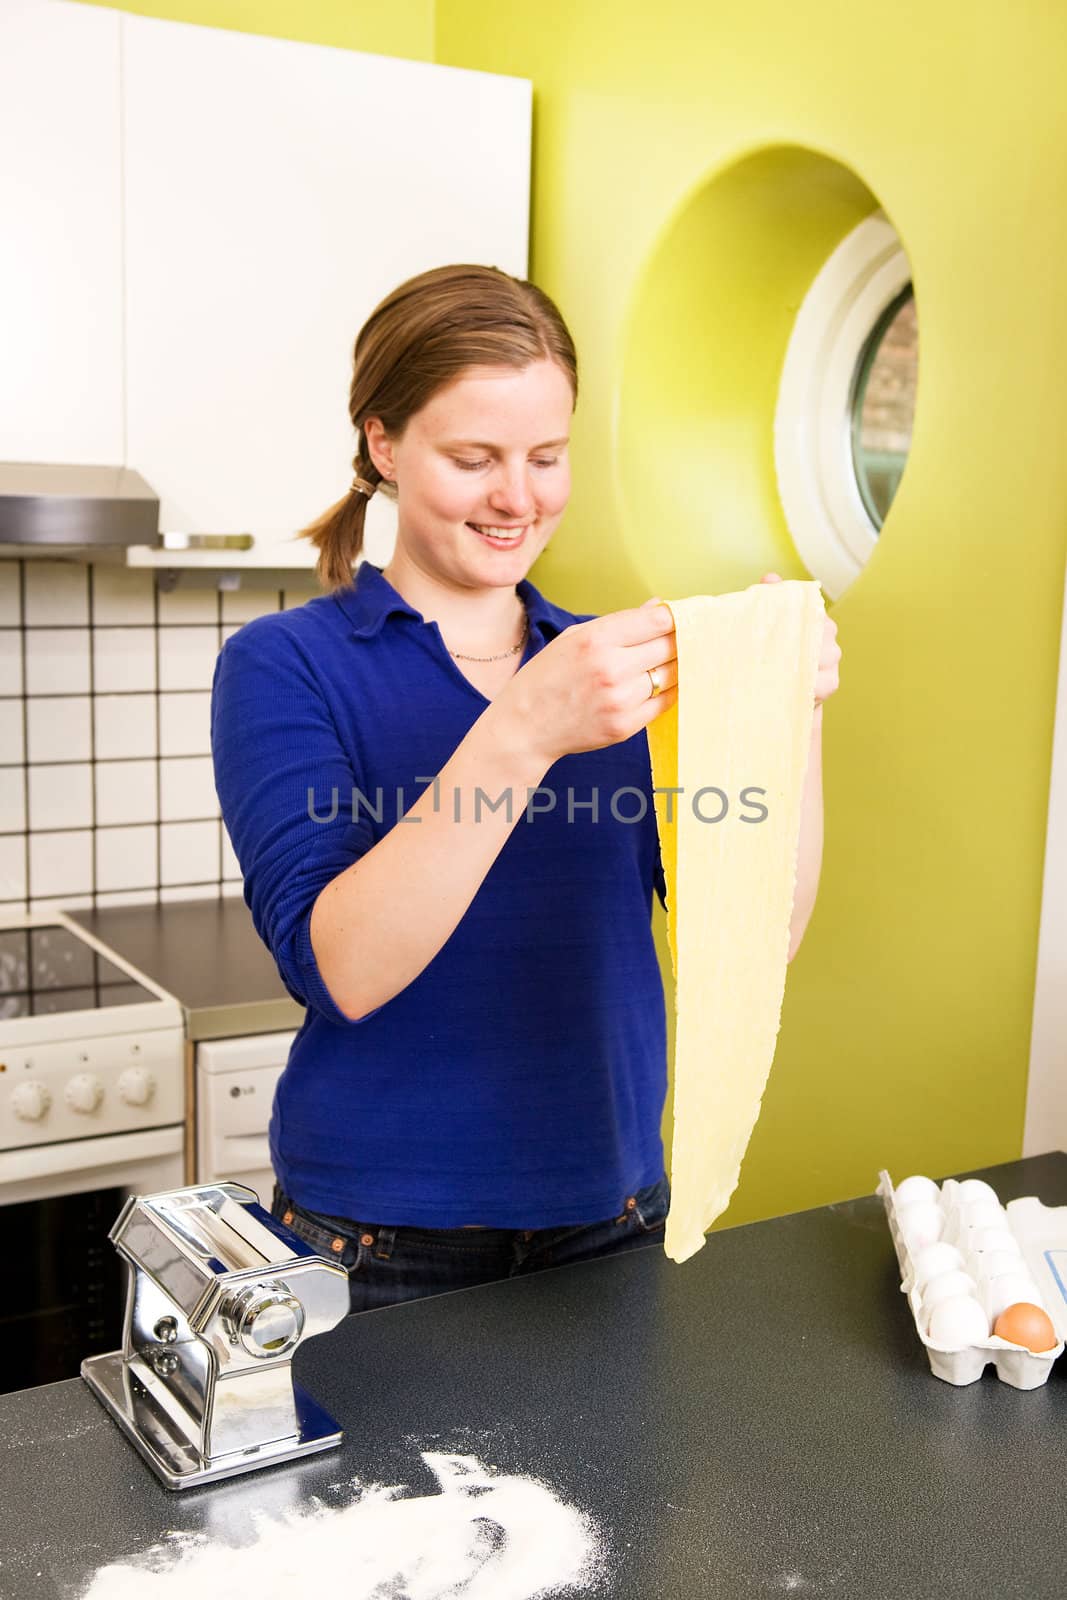 A young woman looks at the pasta she has just made.